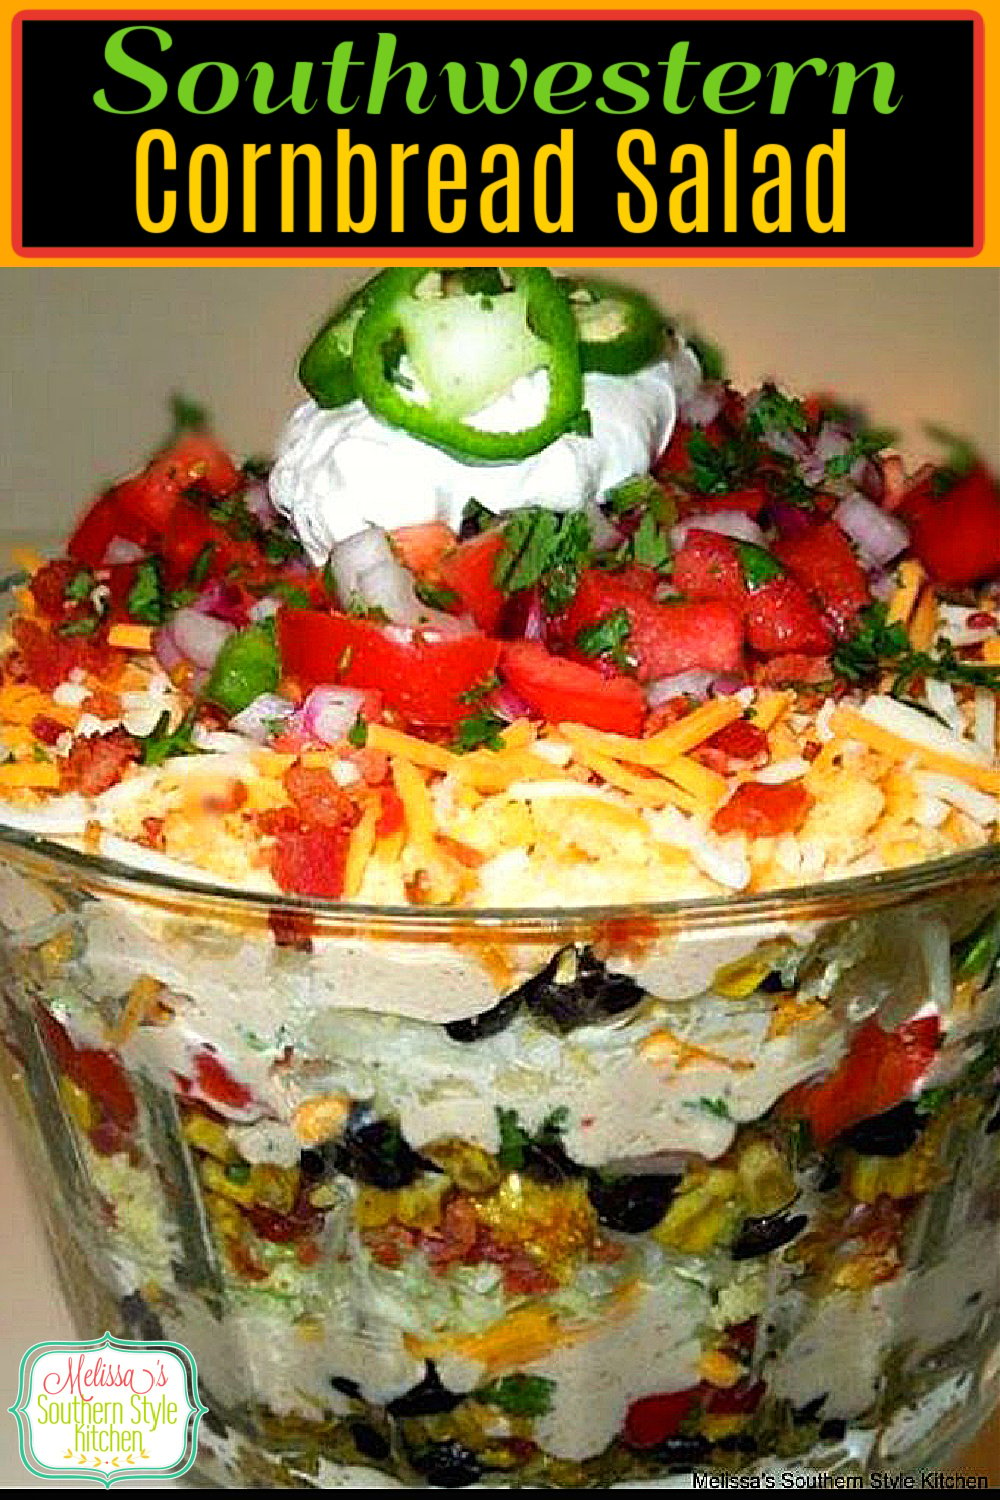 Enjoy this insanely delicious Layered Southwestern Cornbread Salad as a side dish or with tortilla chips for dipping #cornbreadsalad #southwesternsalad #cornbread #saladrecipes #dinnerideas #sidedishrecipes #southernfood #southernrecipes via @melissasssk